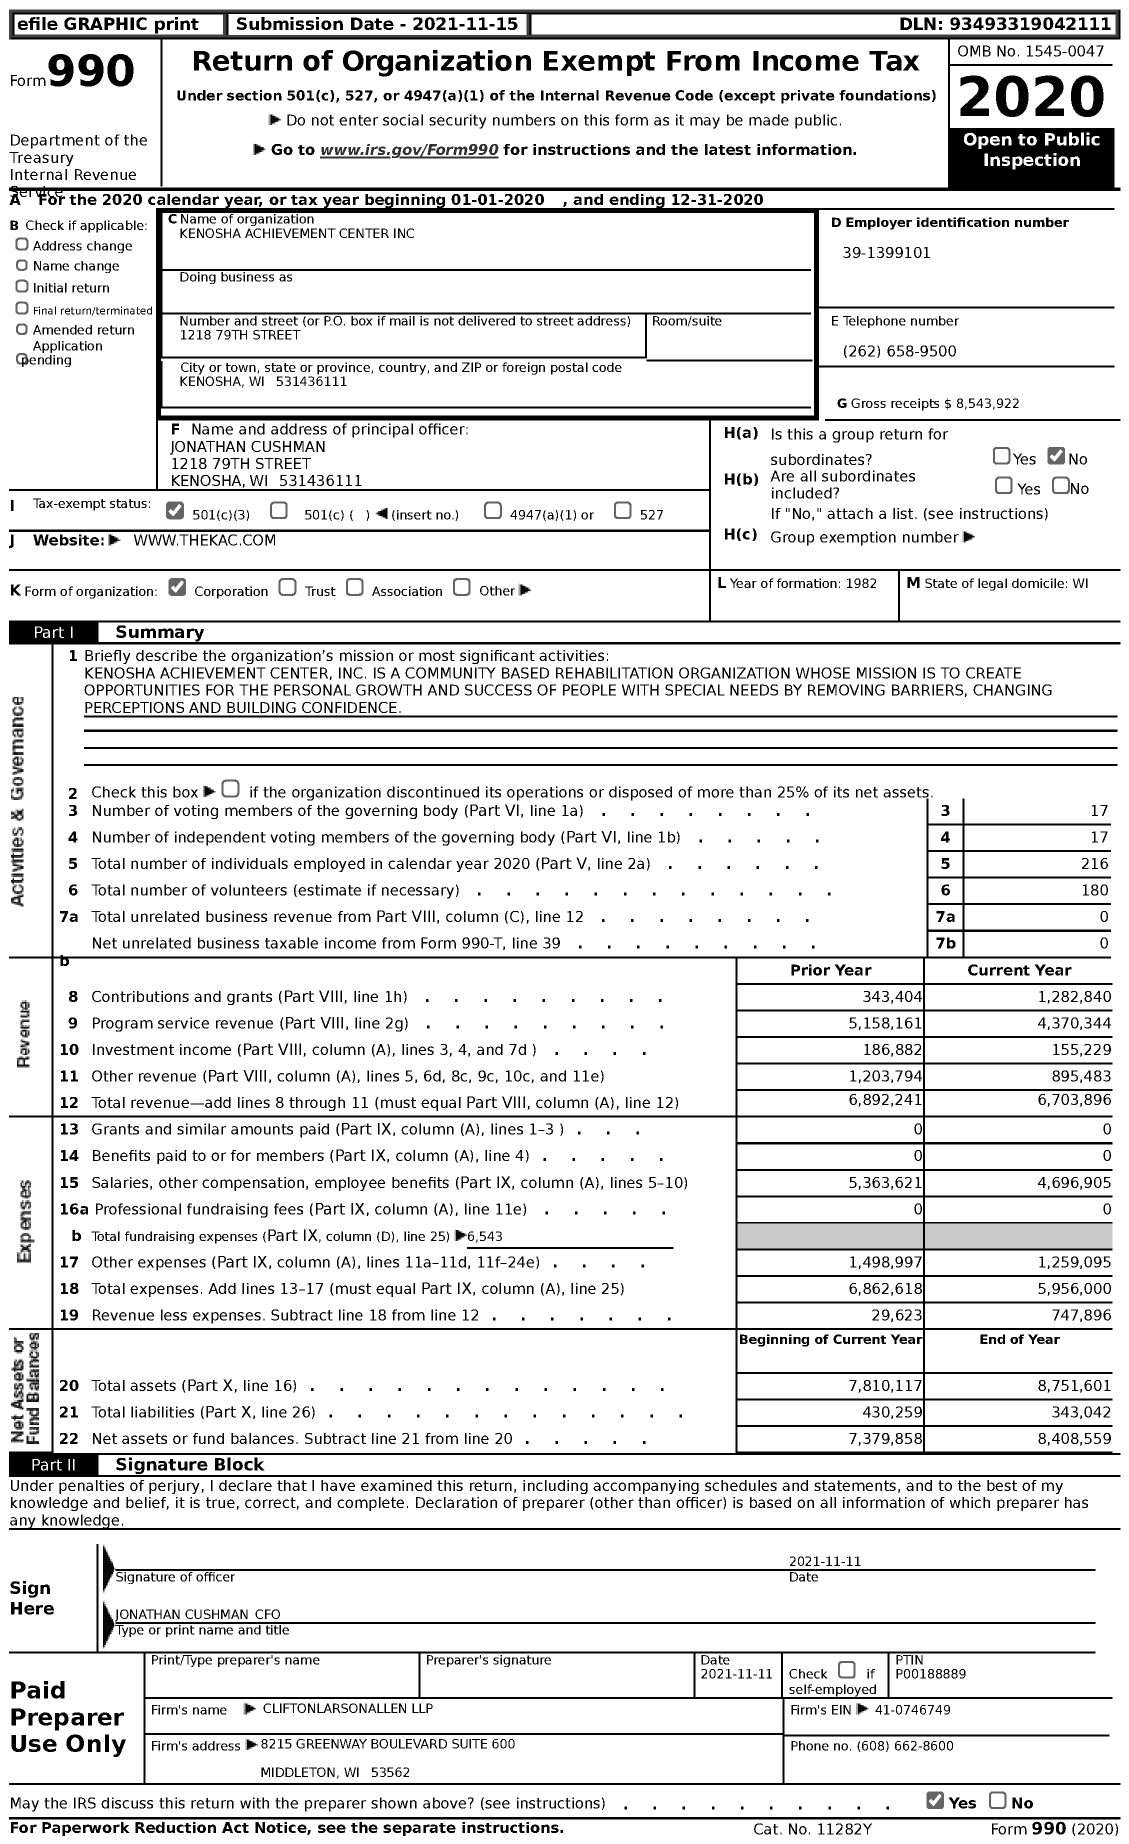 Image of first page of 2020 Form 990 for Kenosha Achievement Center (KAC)